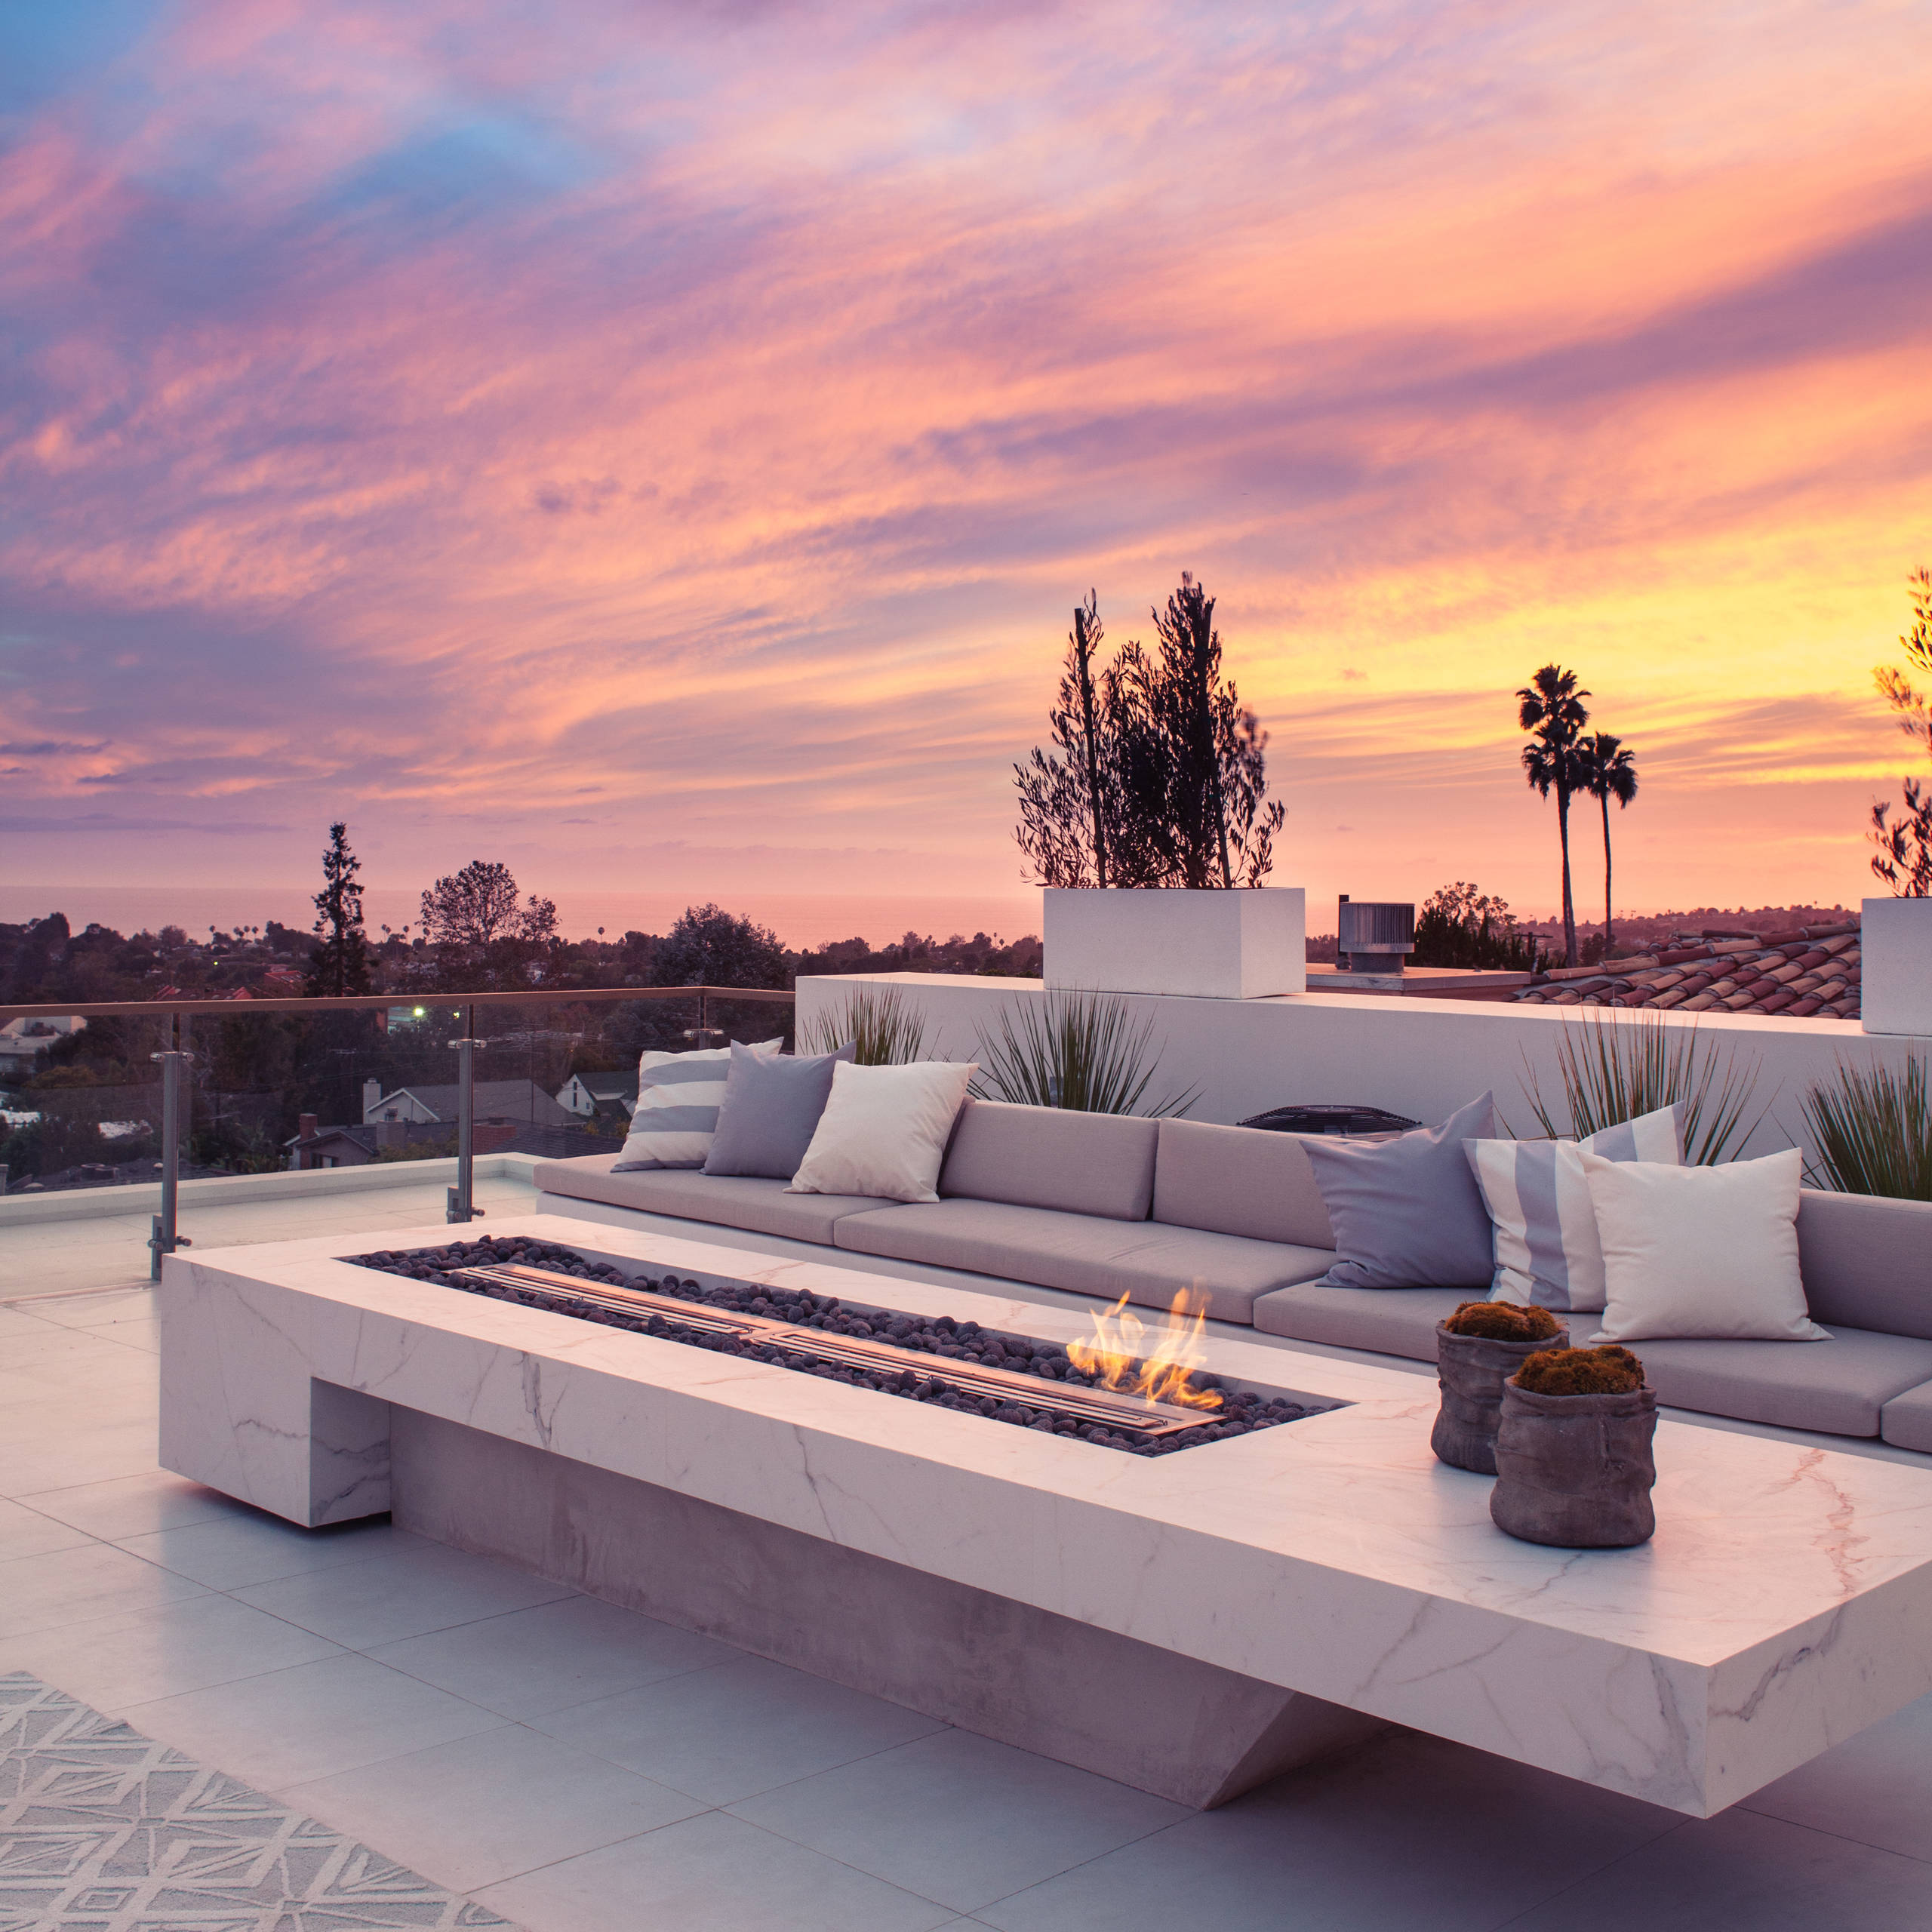 Rooftop Fire Pit Houzz, Rooftop Fire Pit